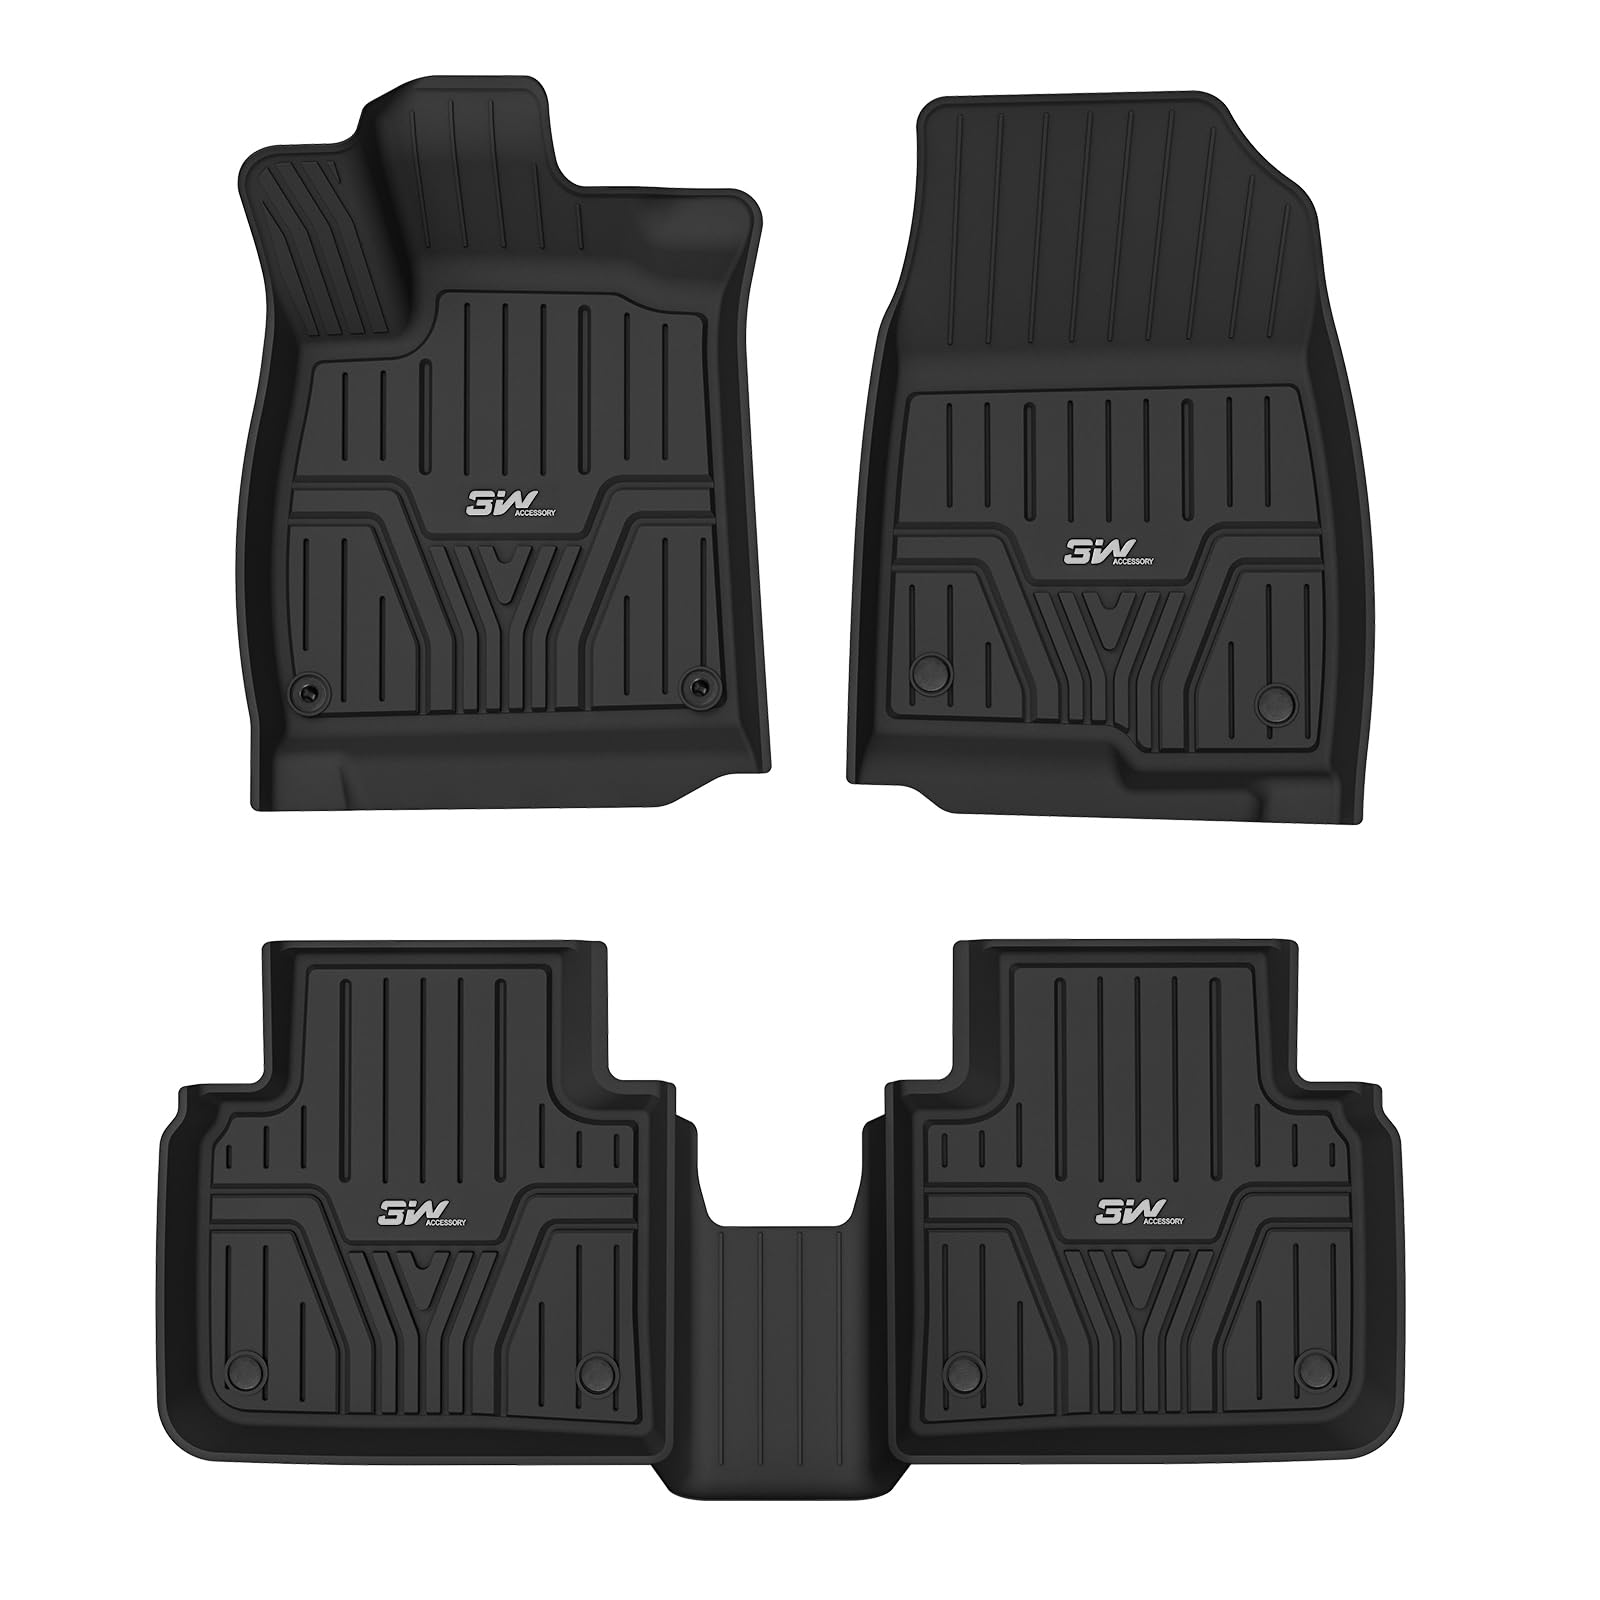 3W Honda Accord 2018-2022 Hatchback Coupe Sedan (Include Hybrid Model) Custom Floor Mats TPE Material & All-Weather Protection Vehicles & Parts 3Wliners 2018-2022 Accord 2018-2022 1st&2nd Row Mats